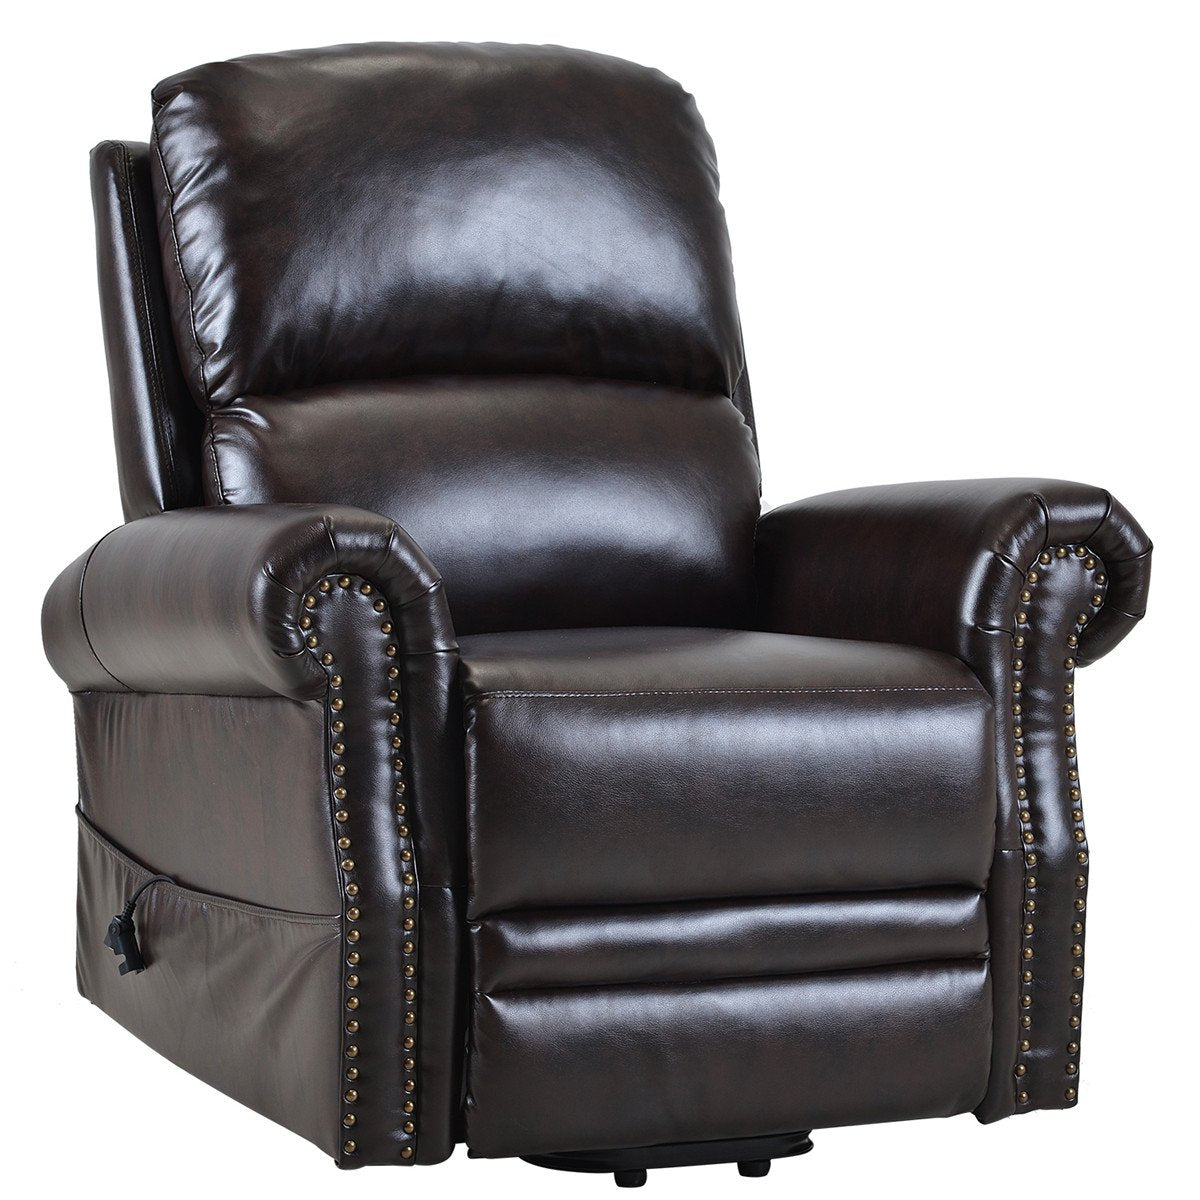 Power Lift Recliner Chair PU Leather Heavy Duty Reclining Mechanism Living Room Furniture